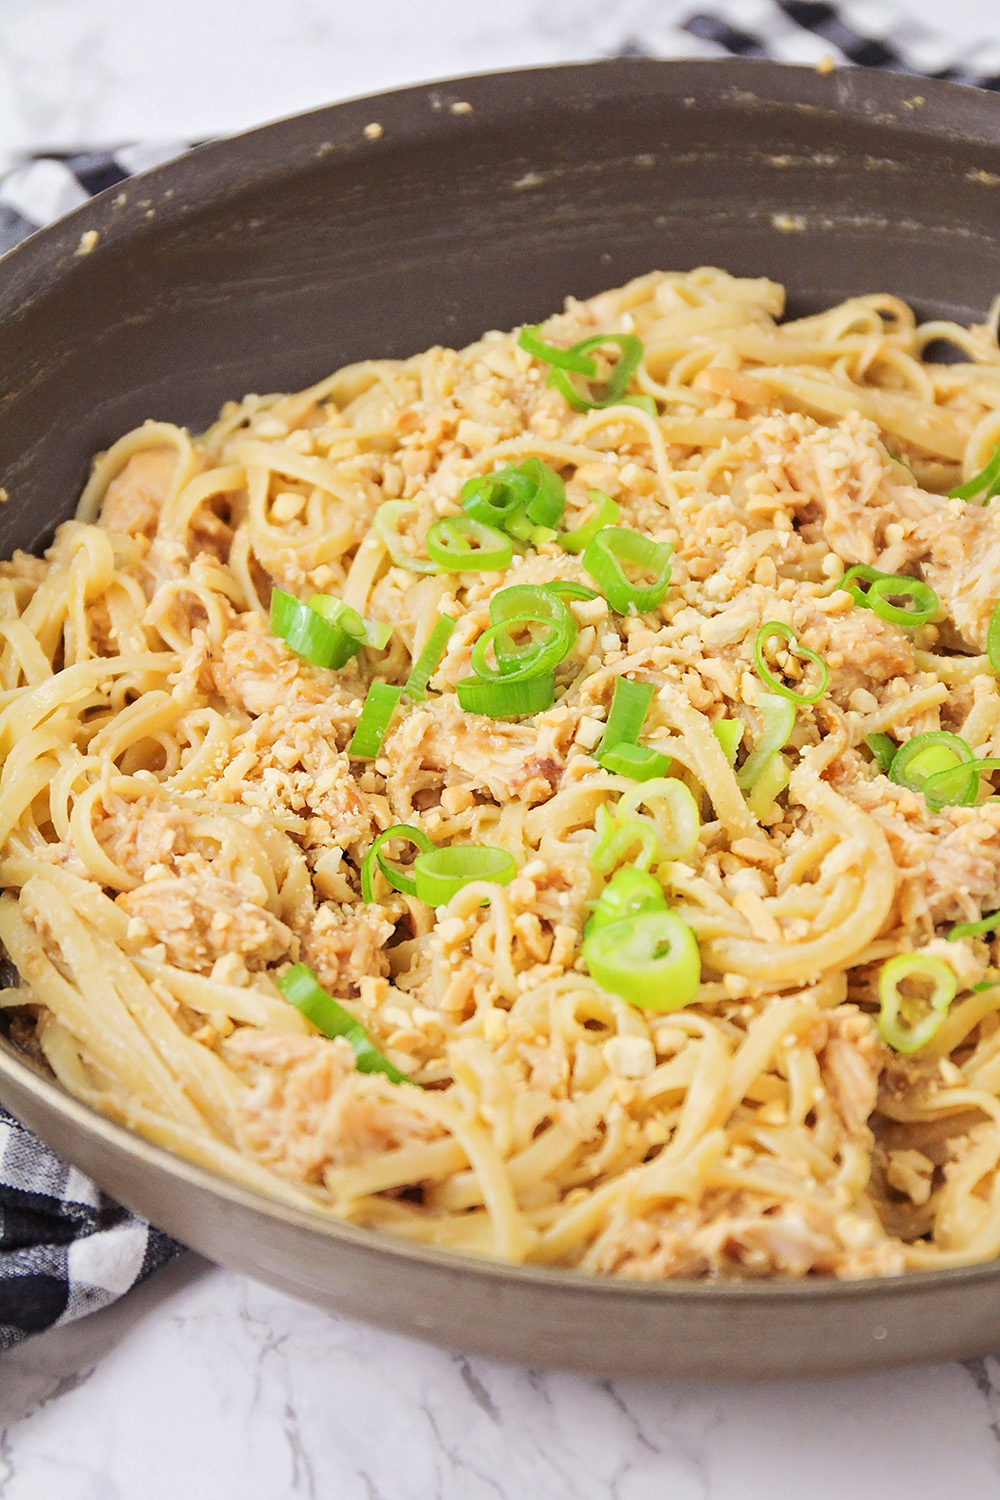 These thai peanut noodles are a savory and flavorful 30 minute meal that the whole family will love!